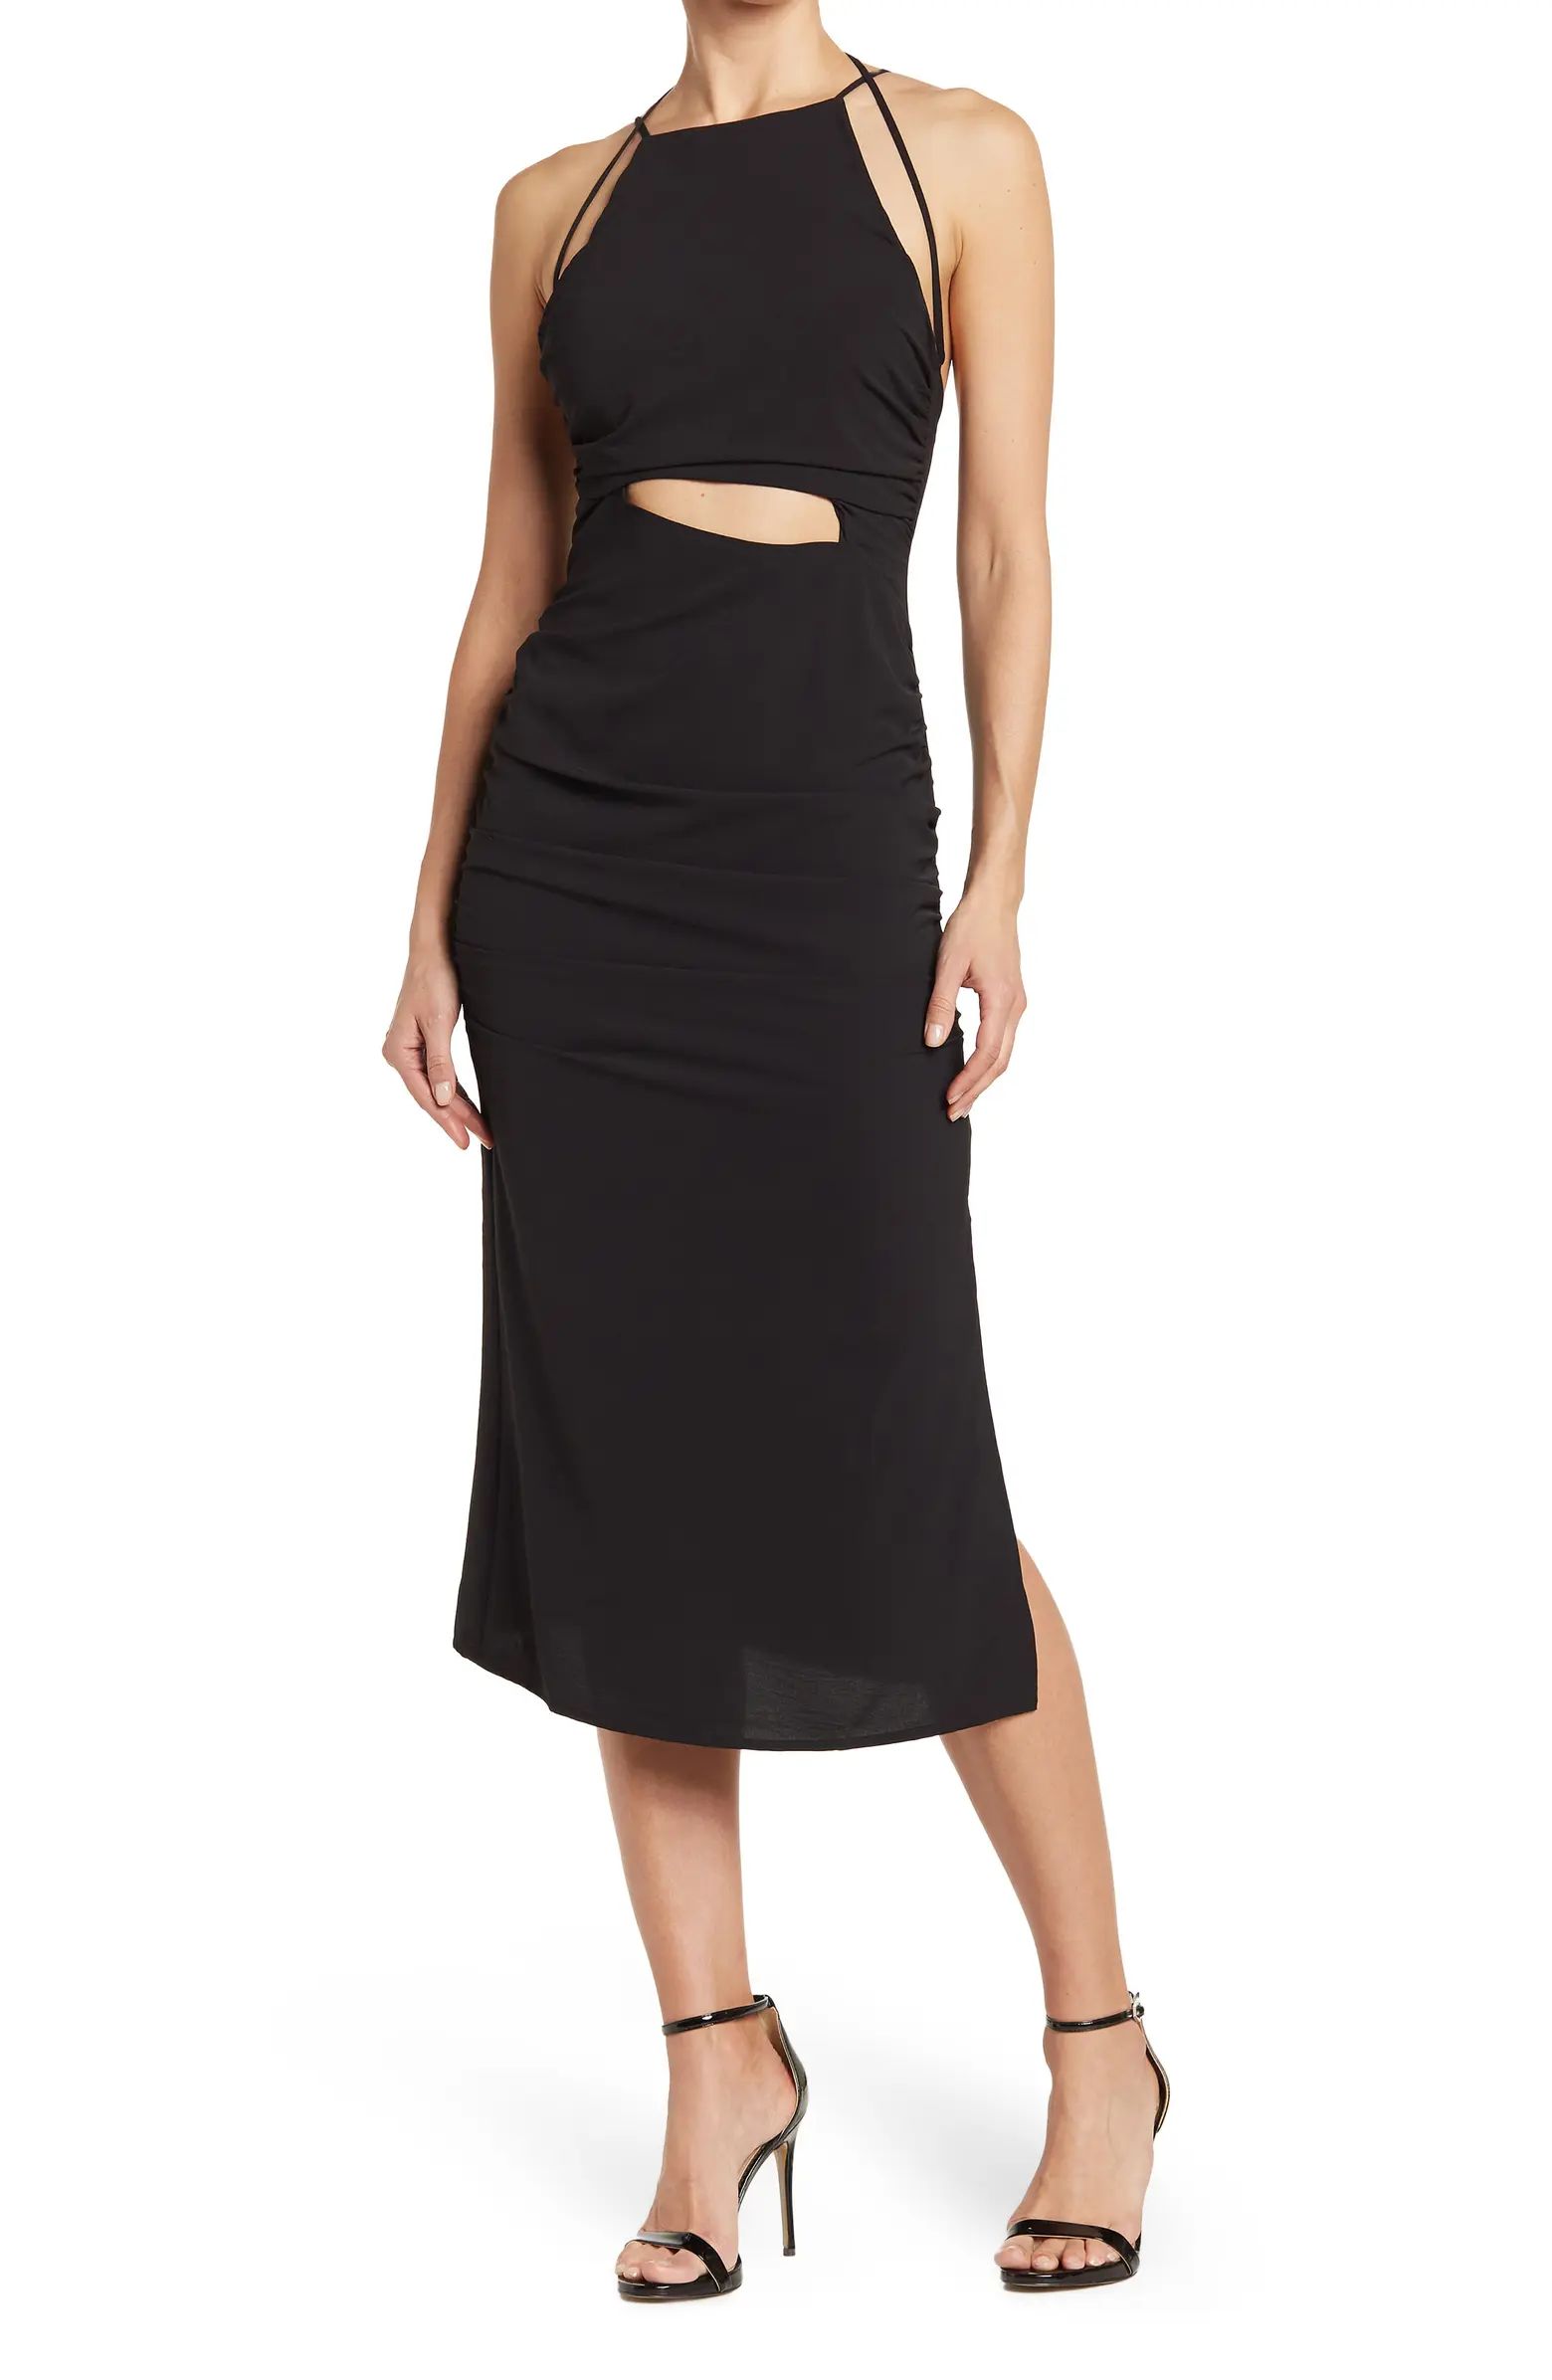 NSR Ruched Midi Dress with Cutout | Nordstromrack | Nordstrom Rack